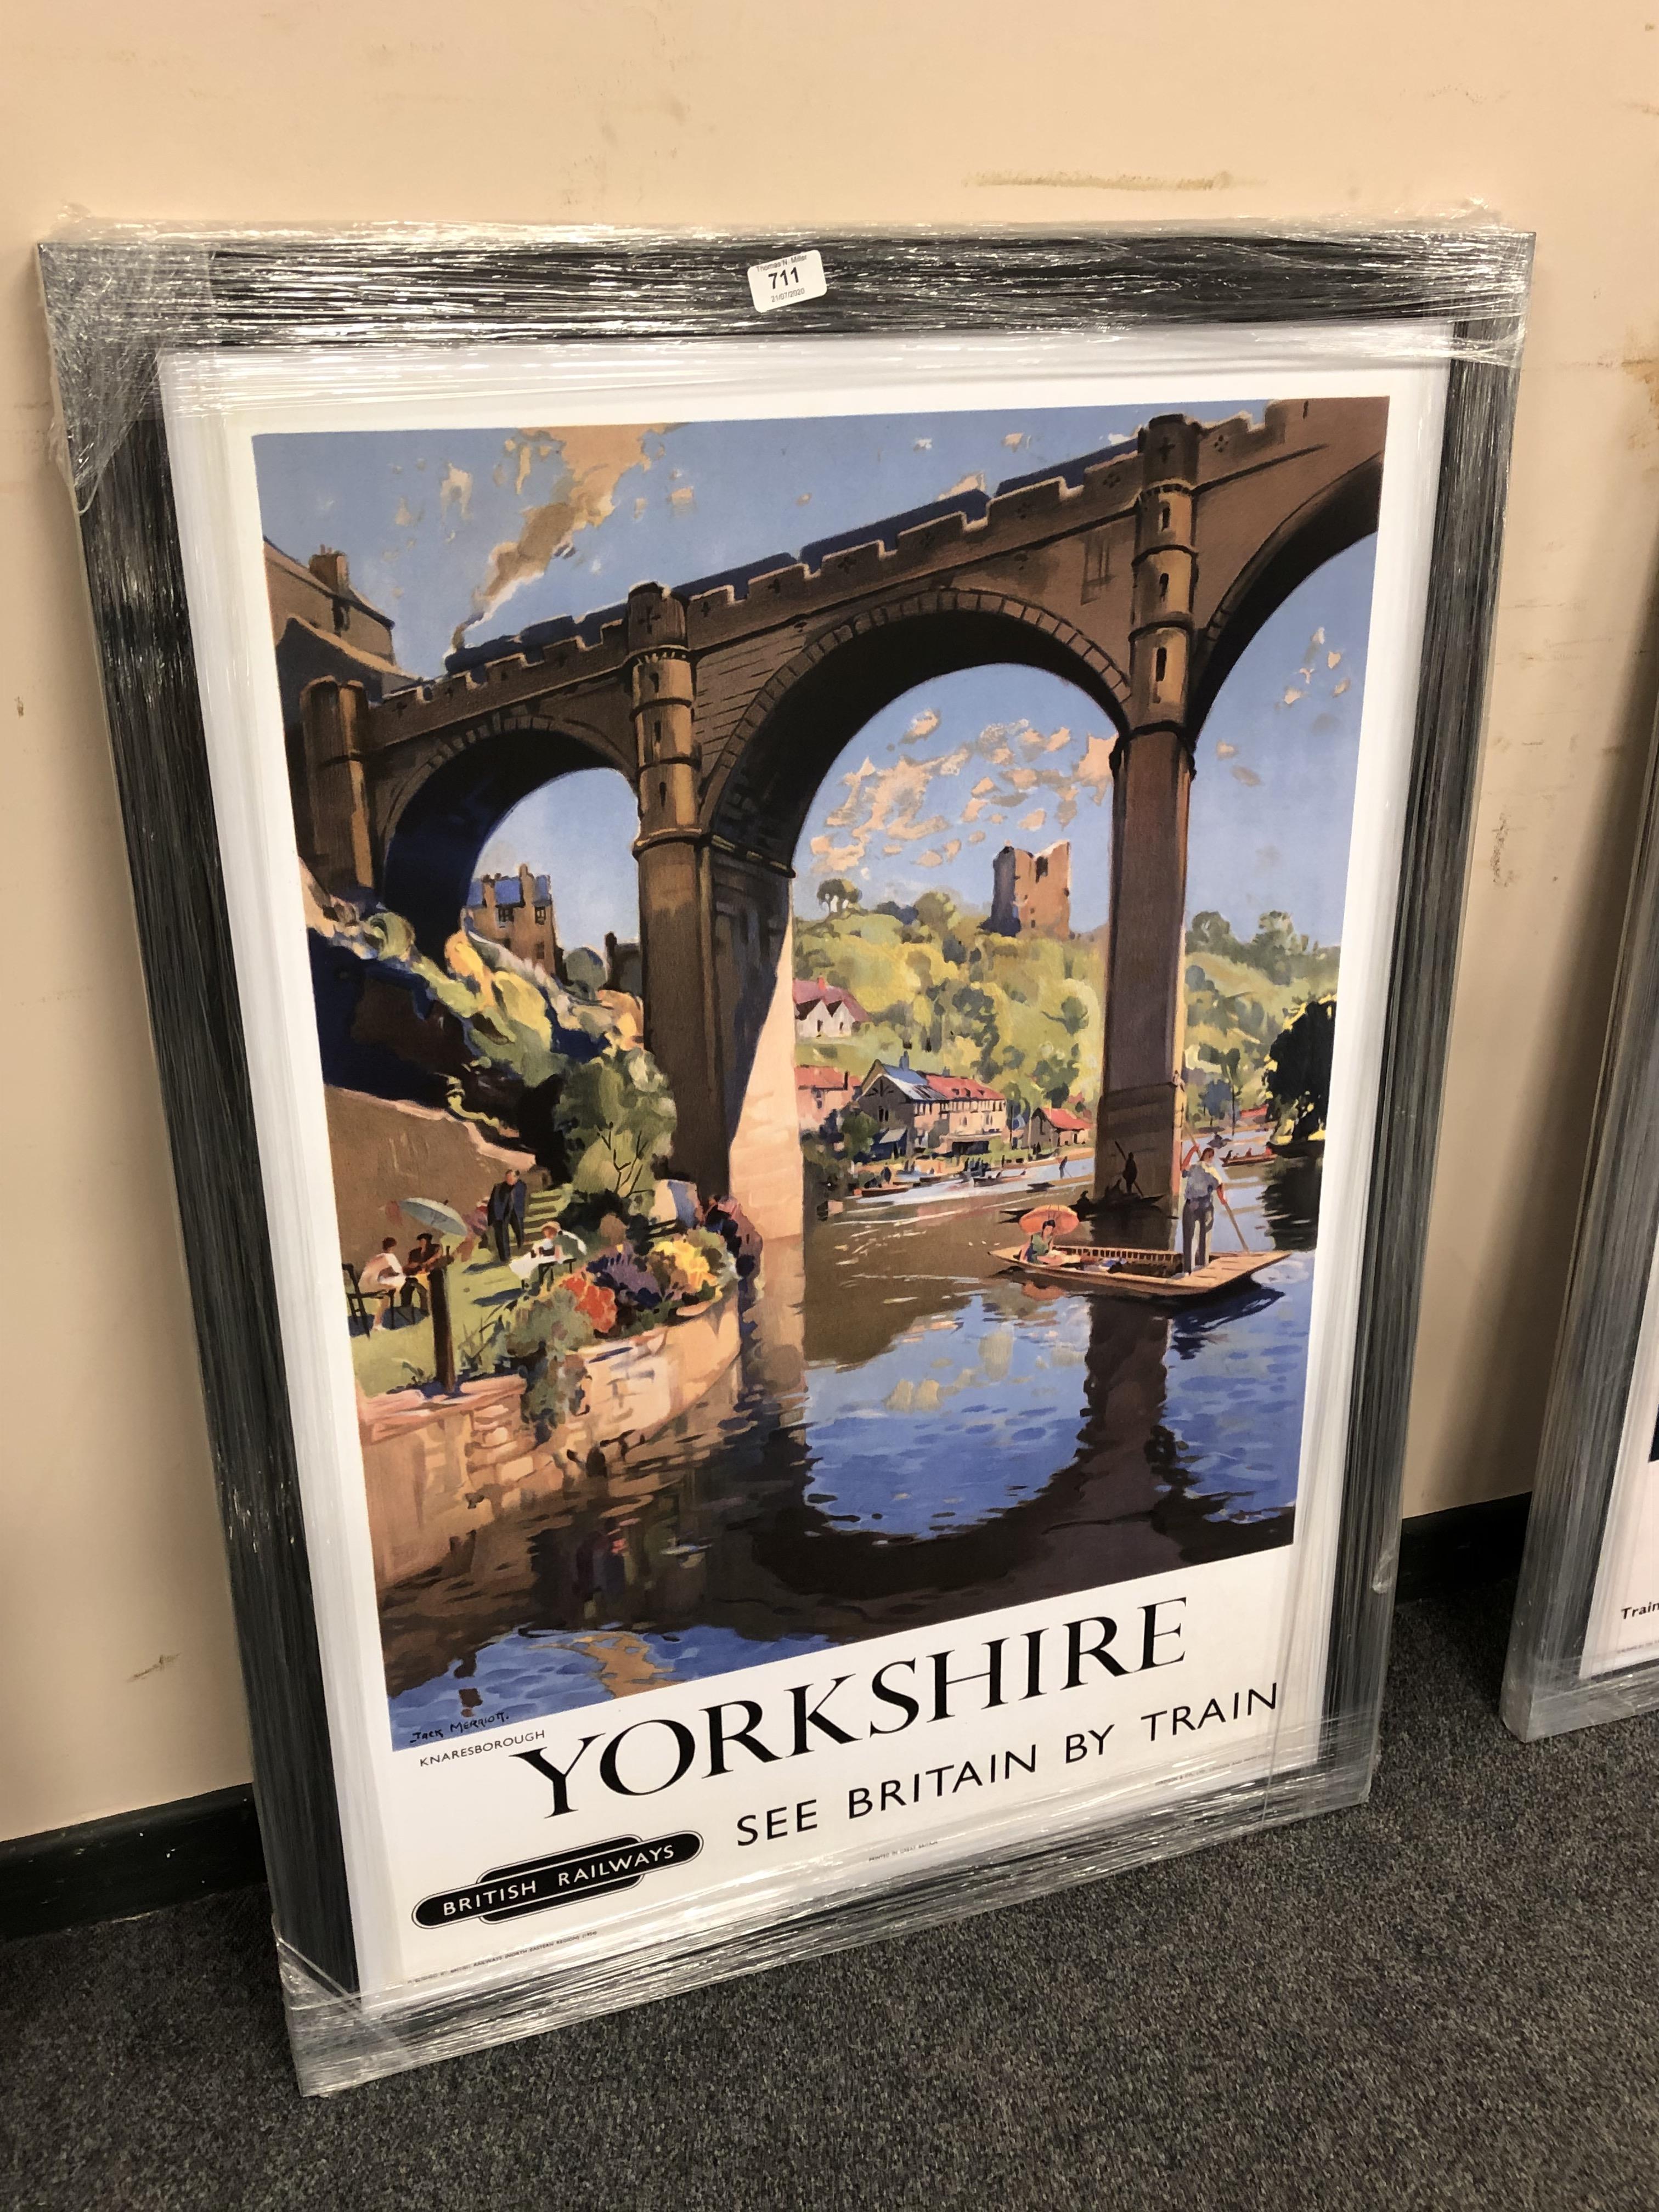 An advertising railway picture - Yorkshire